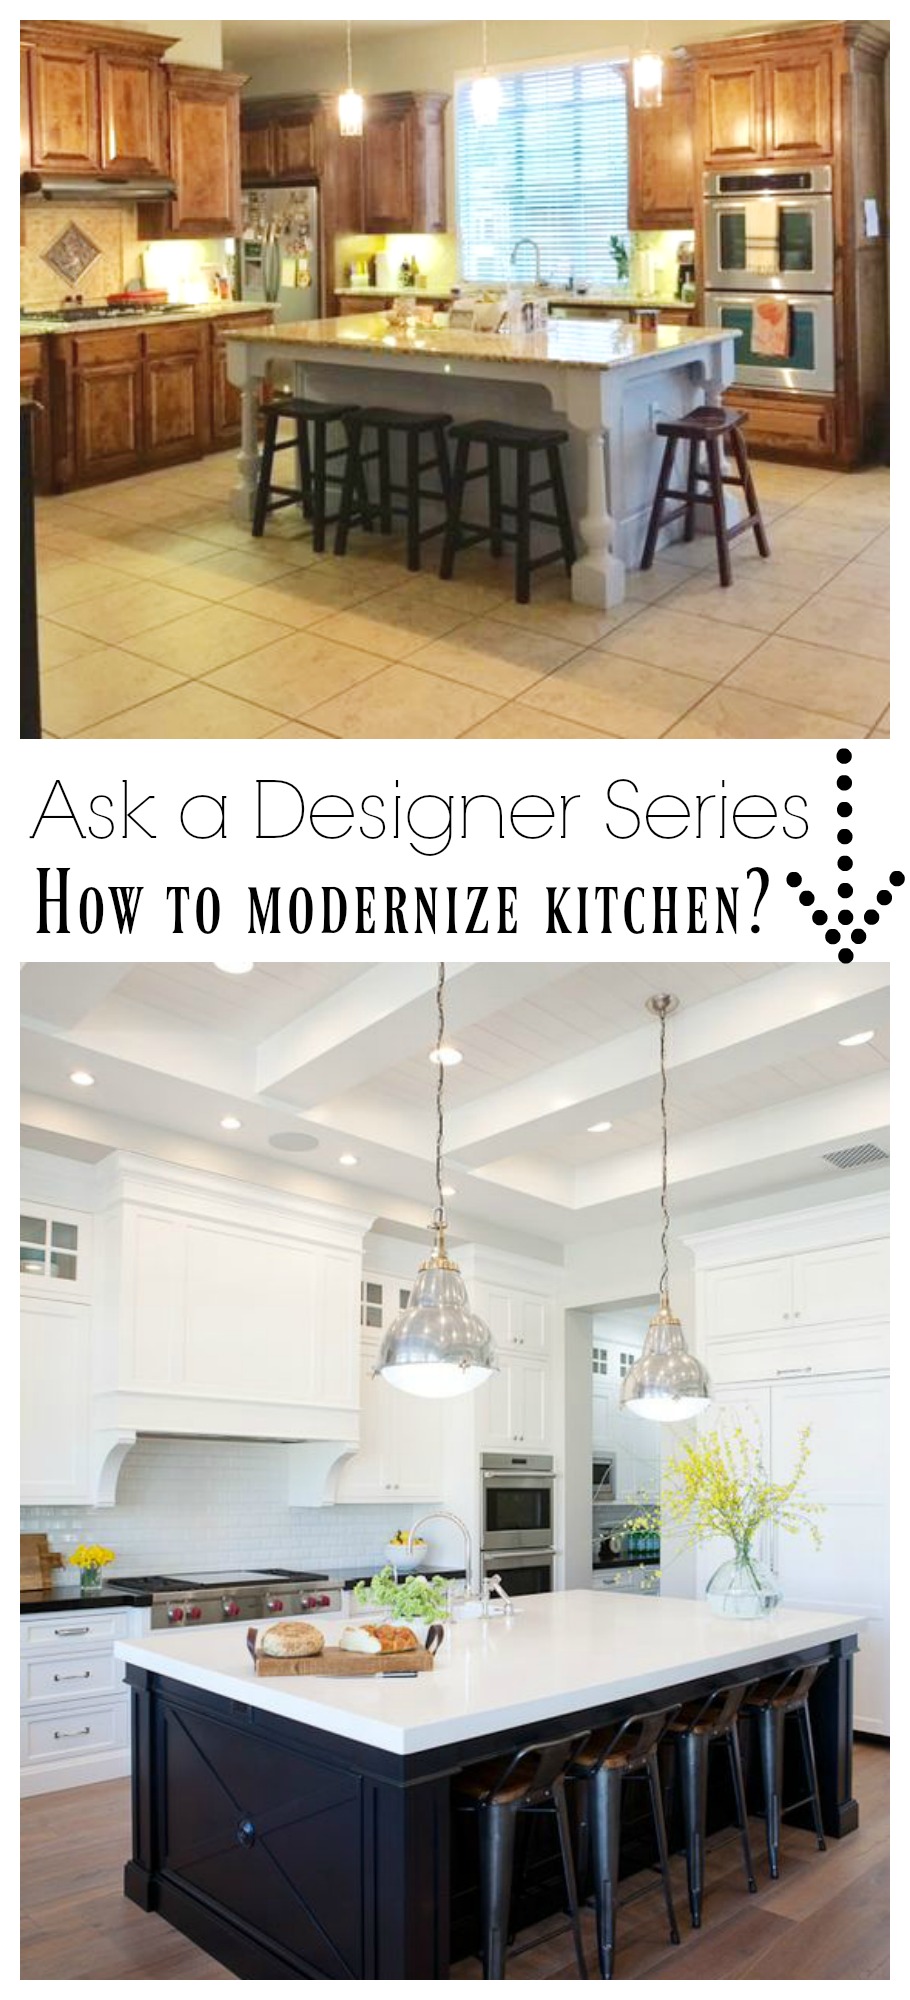 Ask a Designer Series- How to Modernize Dated Kitchen